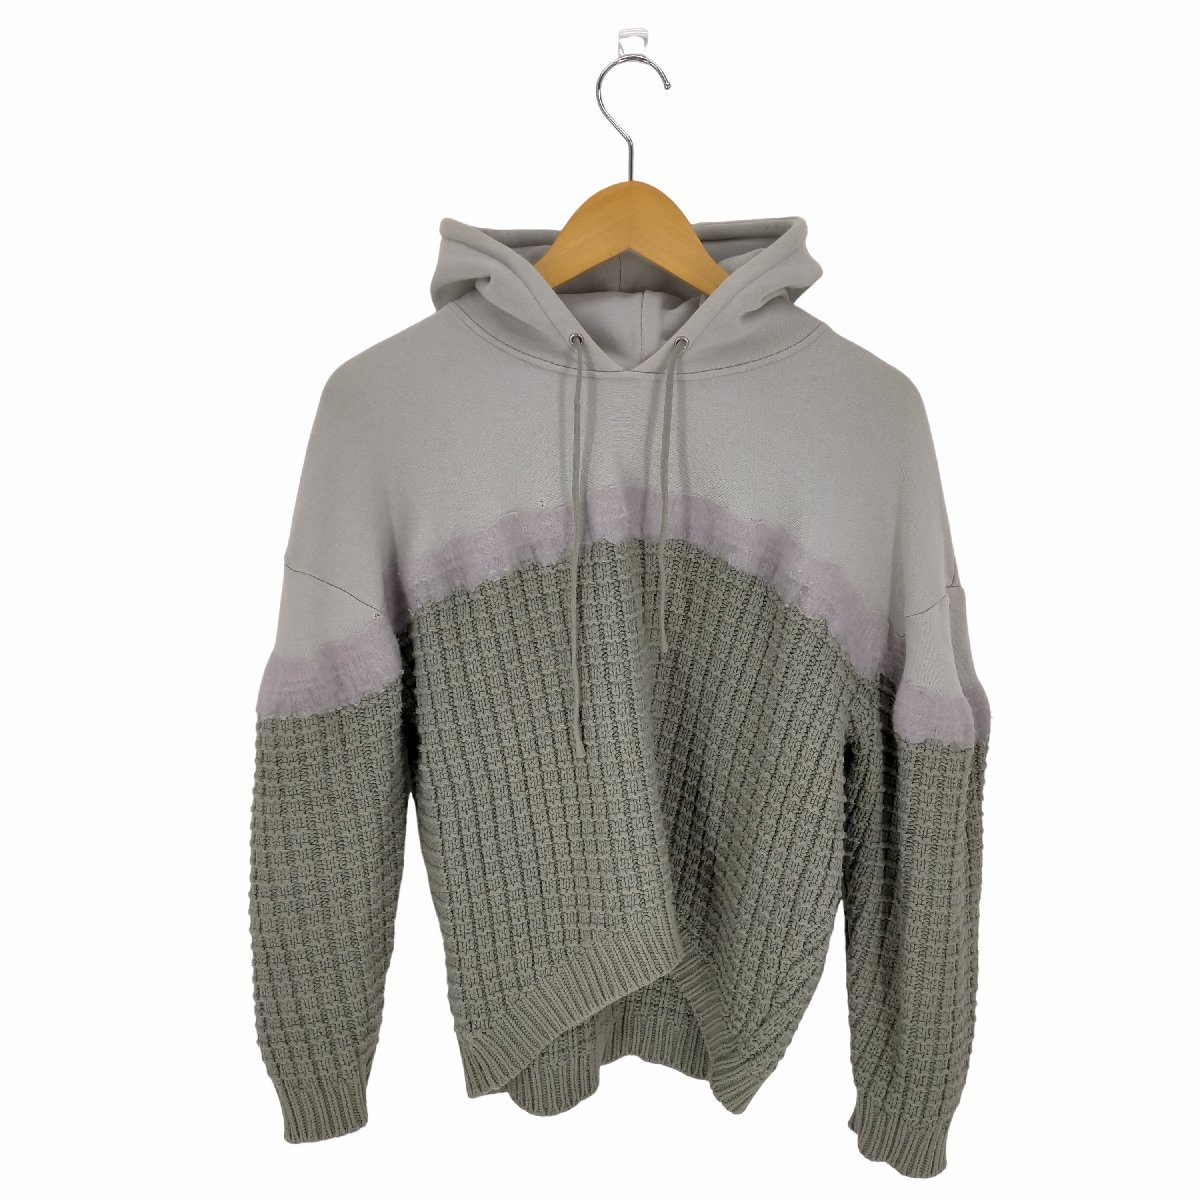 Ameri VINTAGE(アメリヴィンテージ) NEEDLE PUNCH KNIT HOODIE レディ 中古 古着 0311_画像1